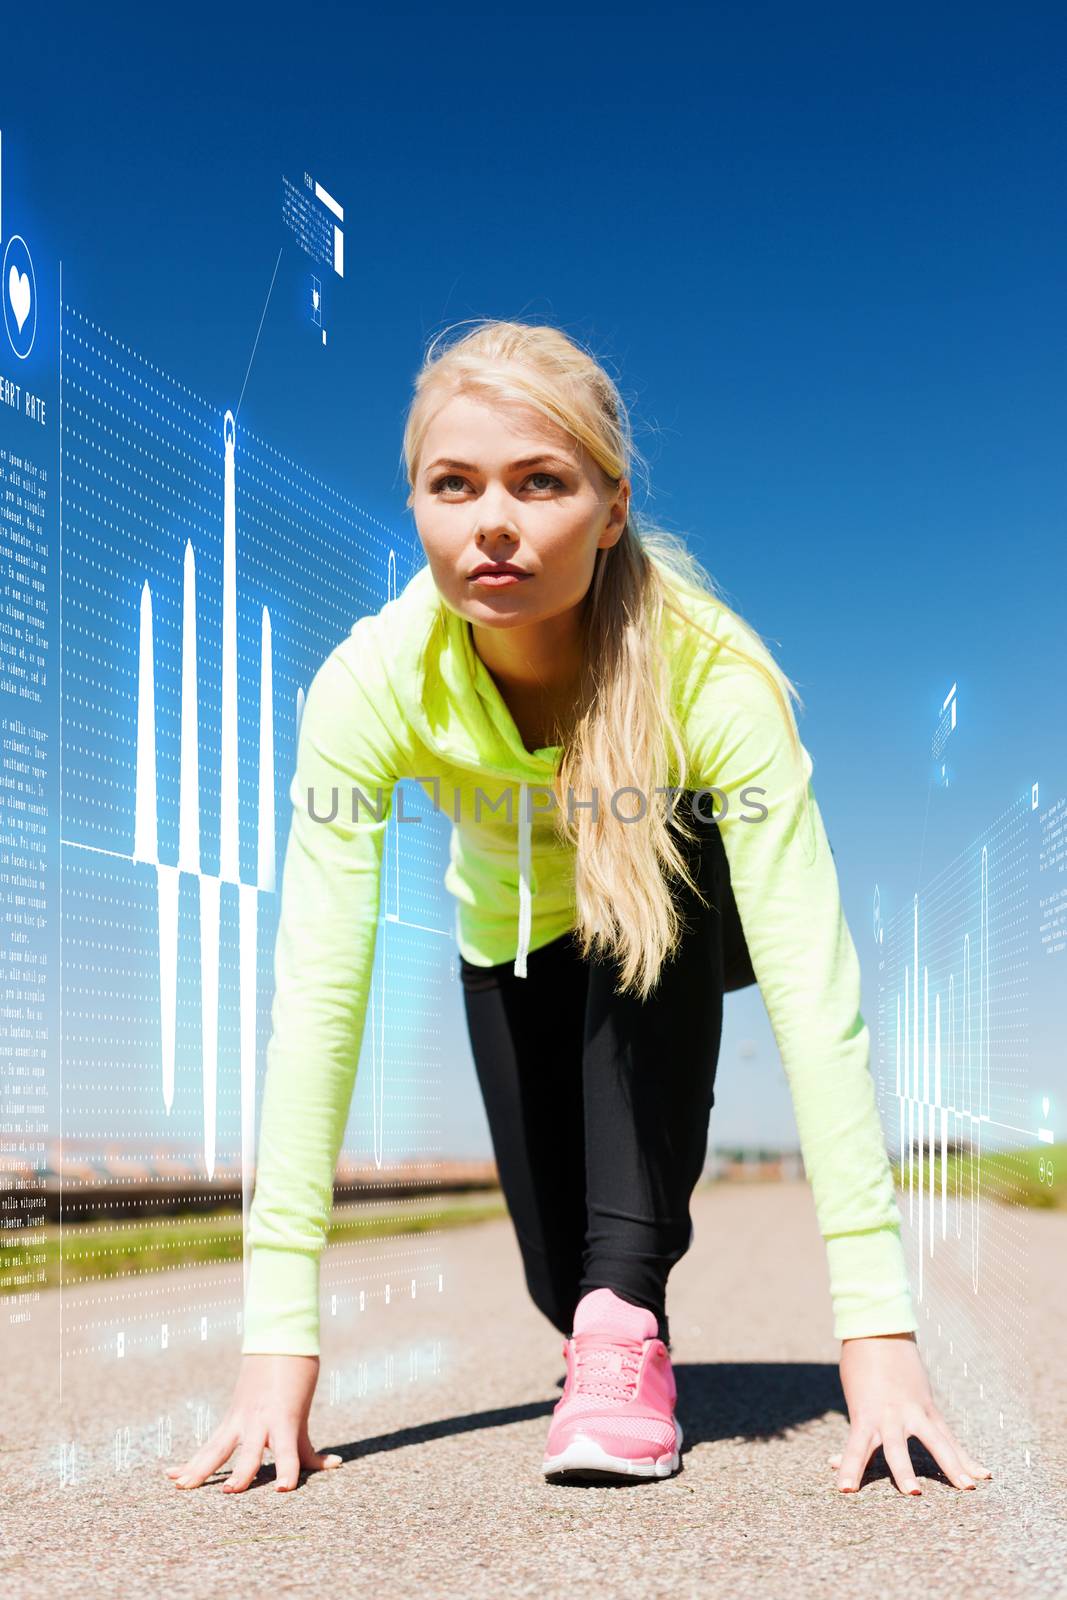 sport and lifestyle concept - concentrated woman doing running outdoors